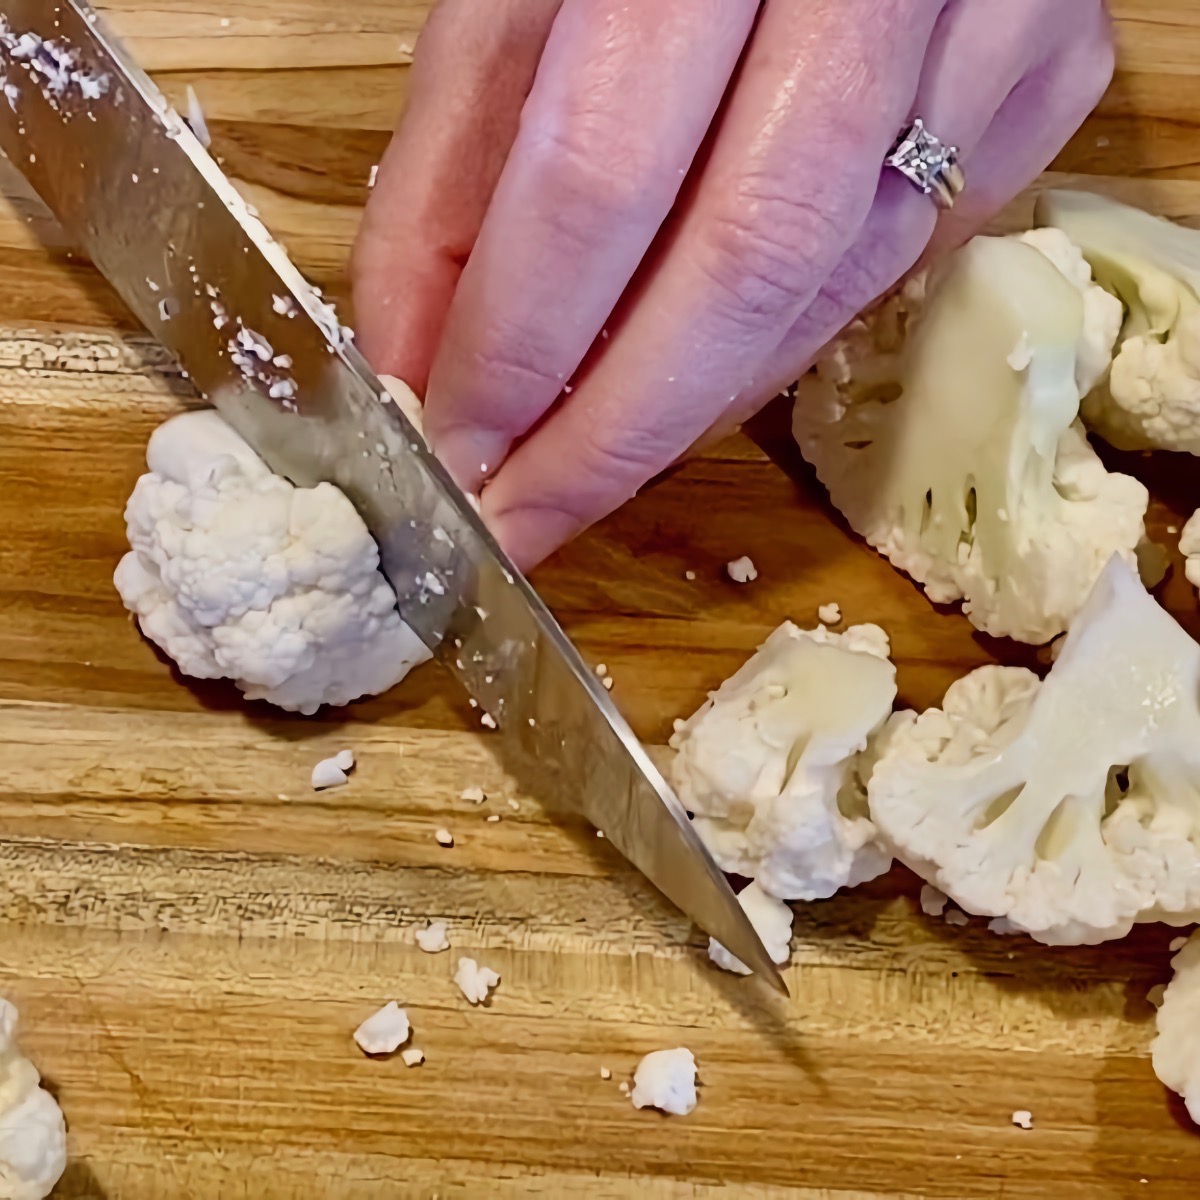 Close up view of a knife cutting cauliflower florets into 1 inch pieces on a cutting board.